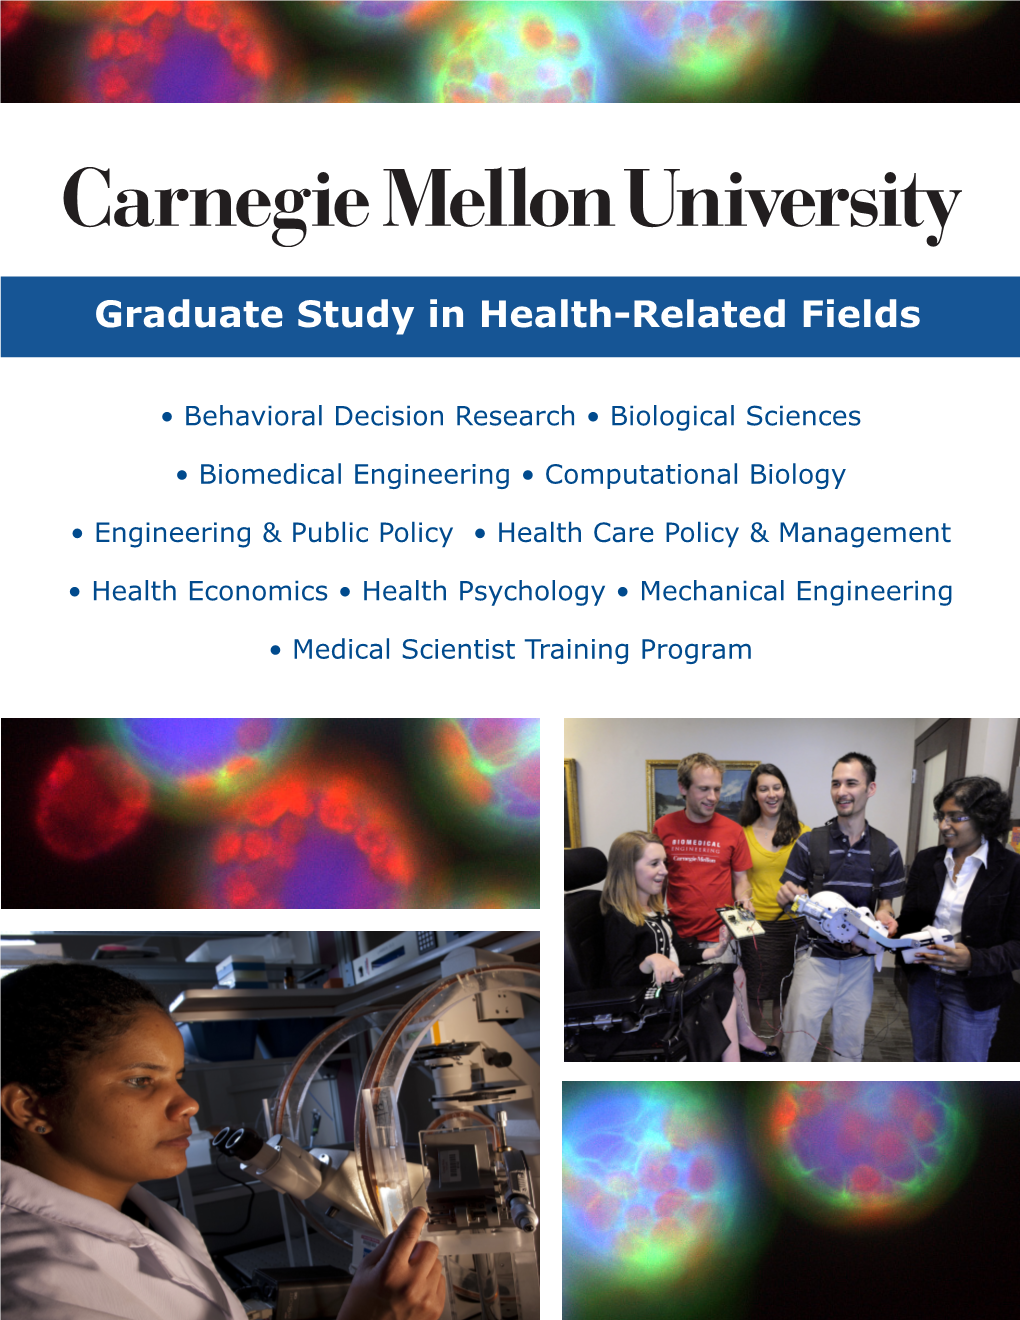 Graduate Study in Health-Related Fields